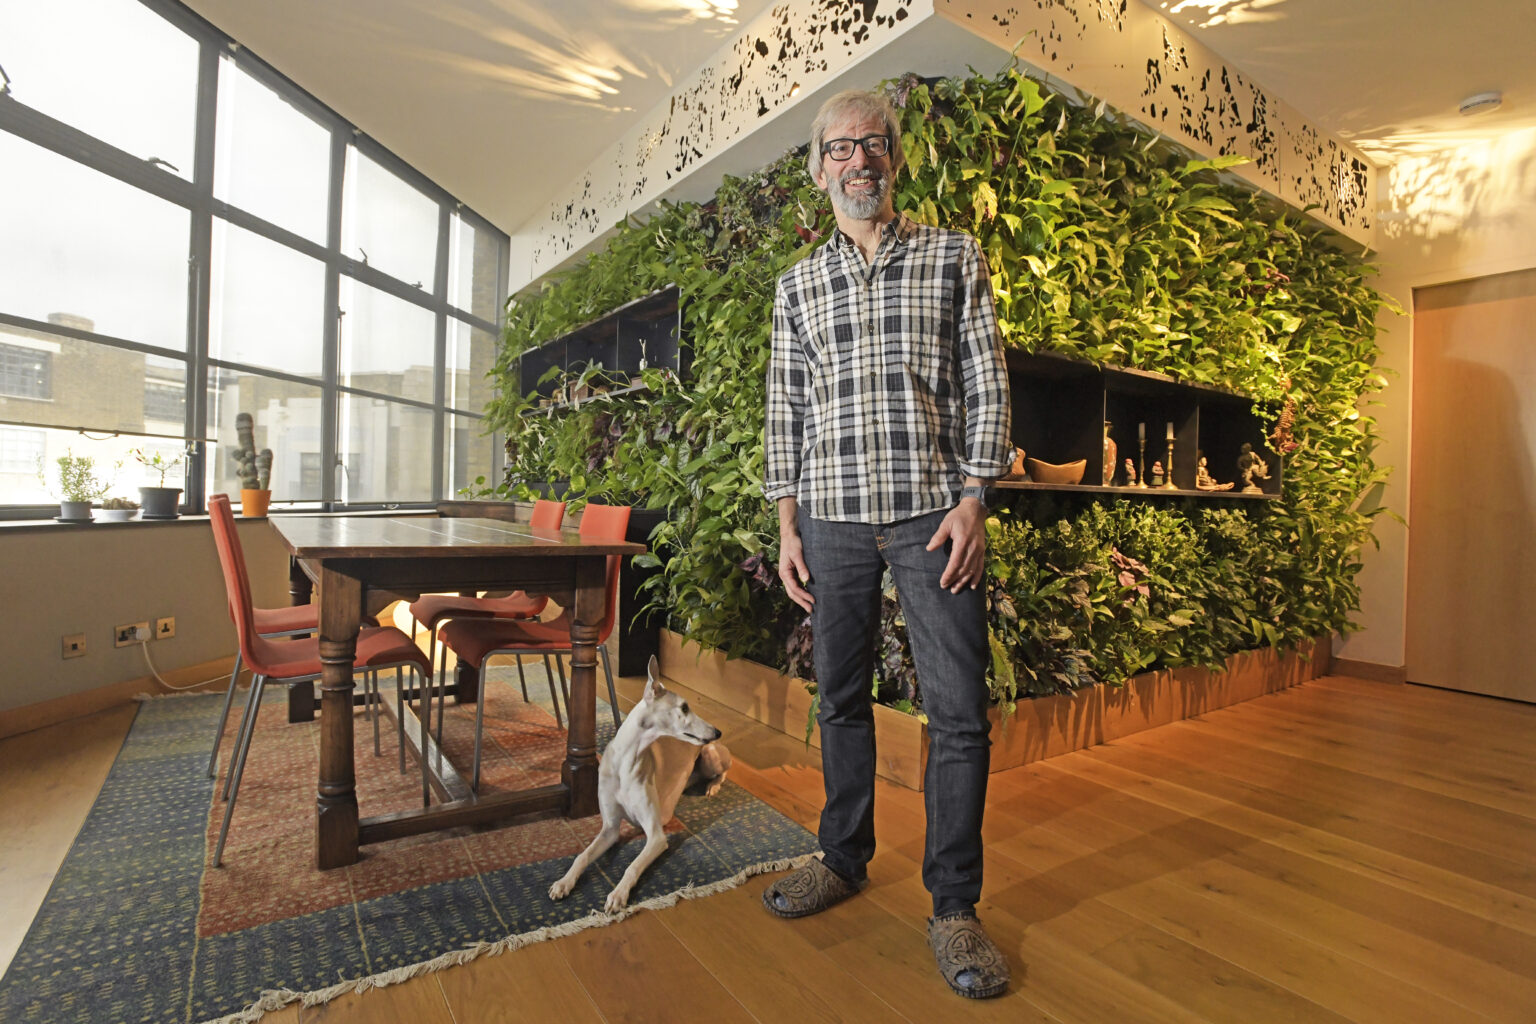 How one homeowner brought the outdoors inside with over with a green wall featuring 1,200 plants